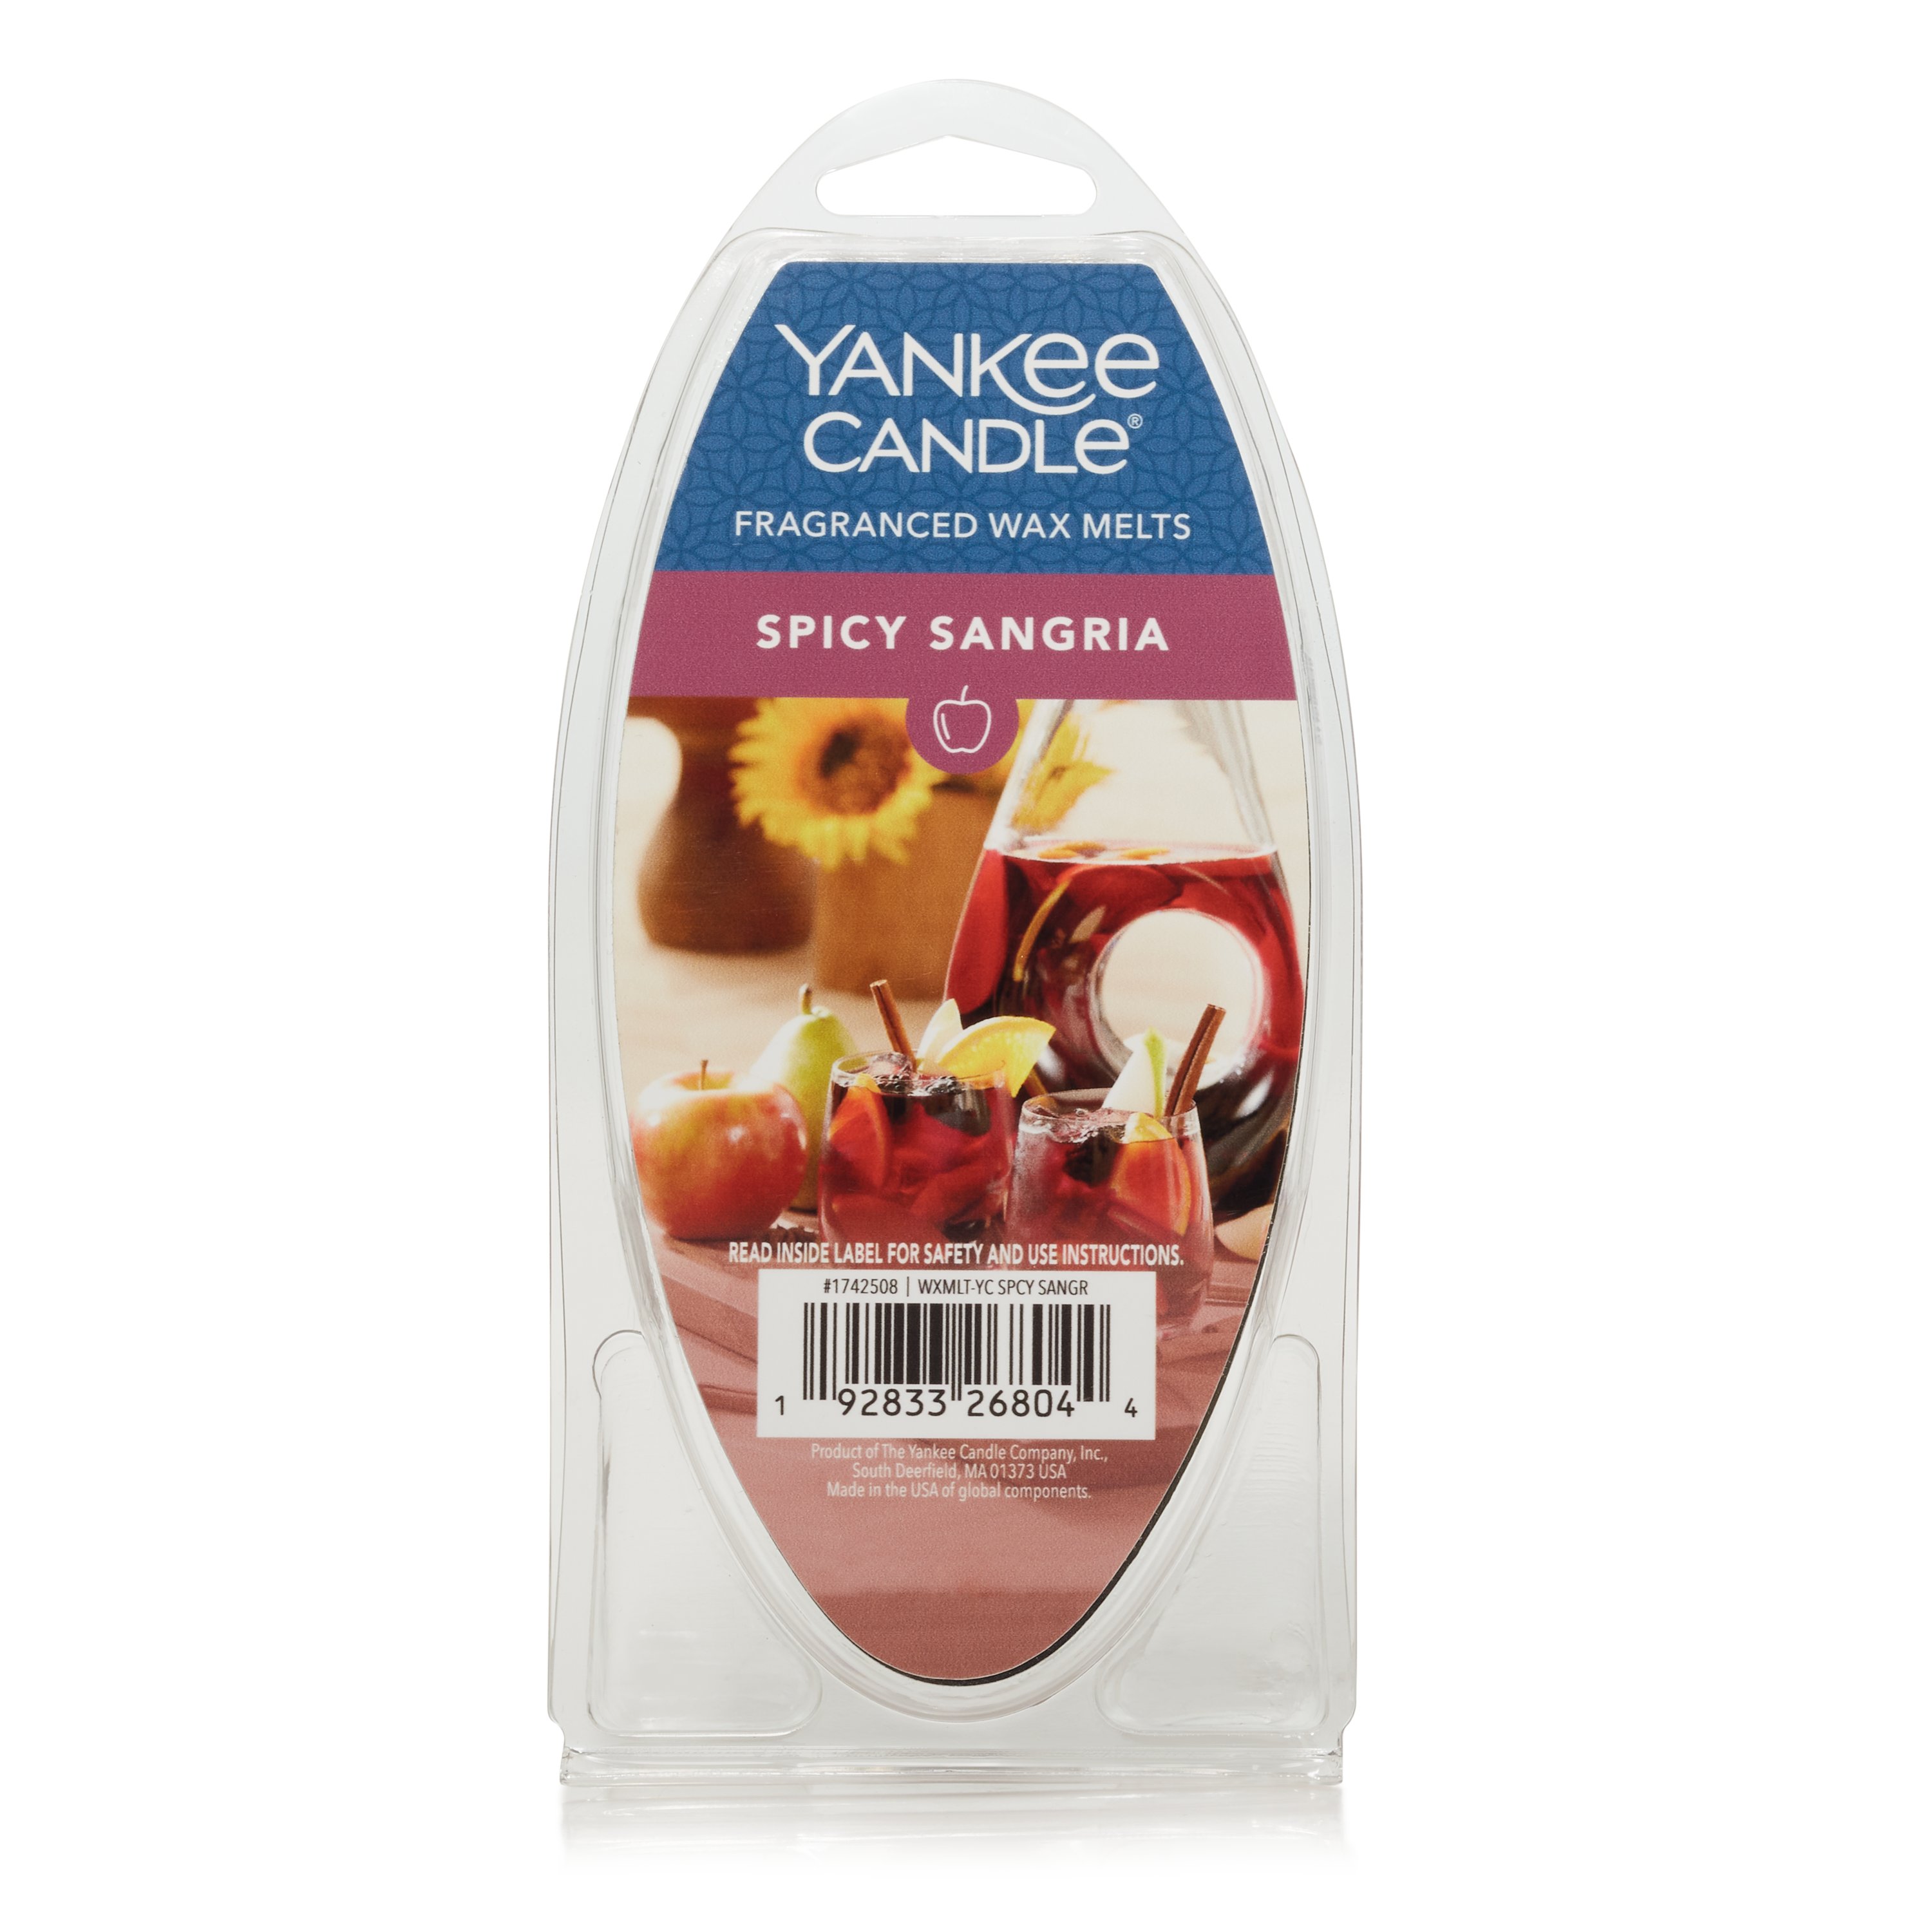 Yankee Candle Spicy Sangria Wax Melts, Size: 2.6 oz